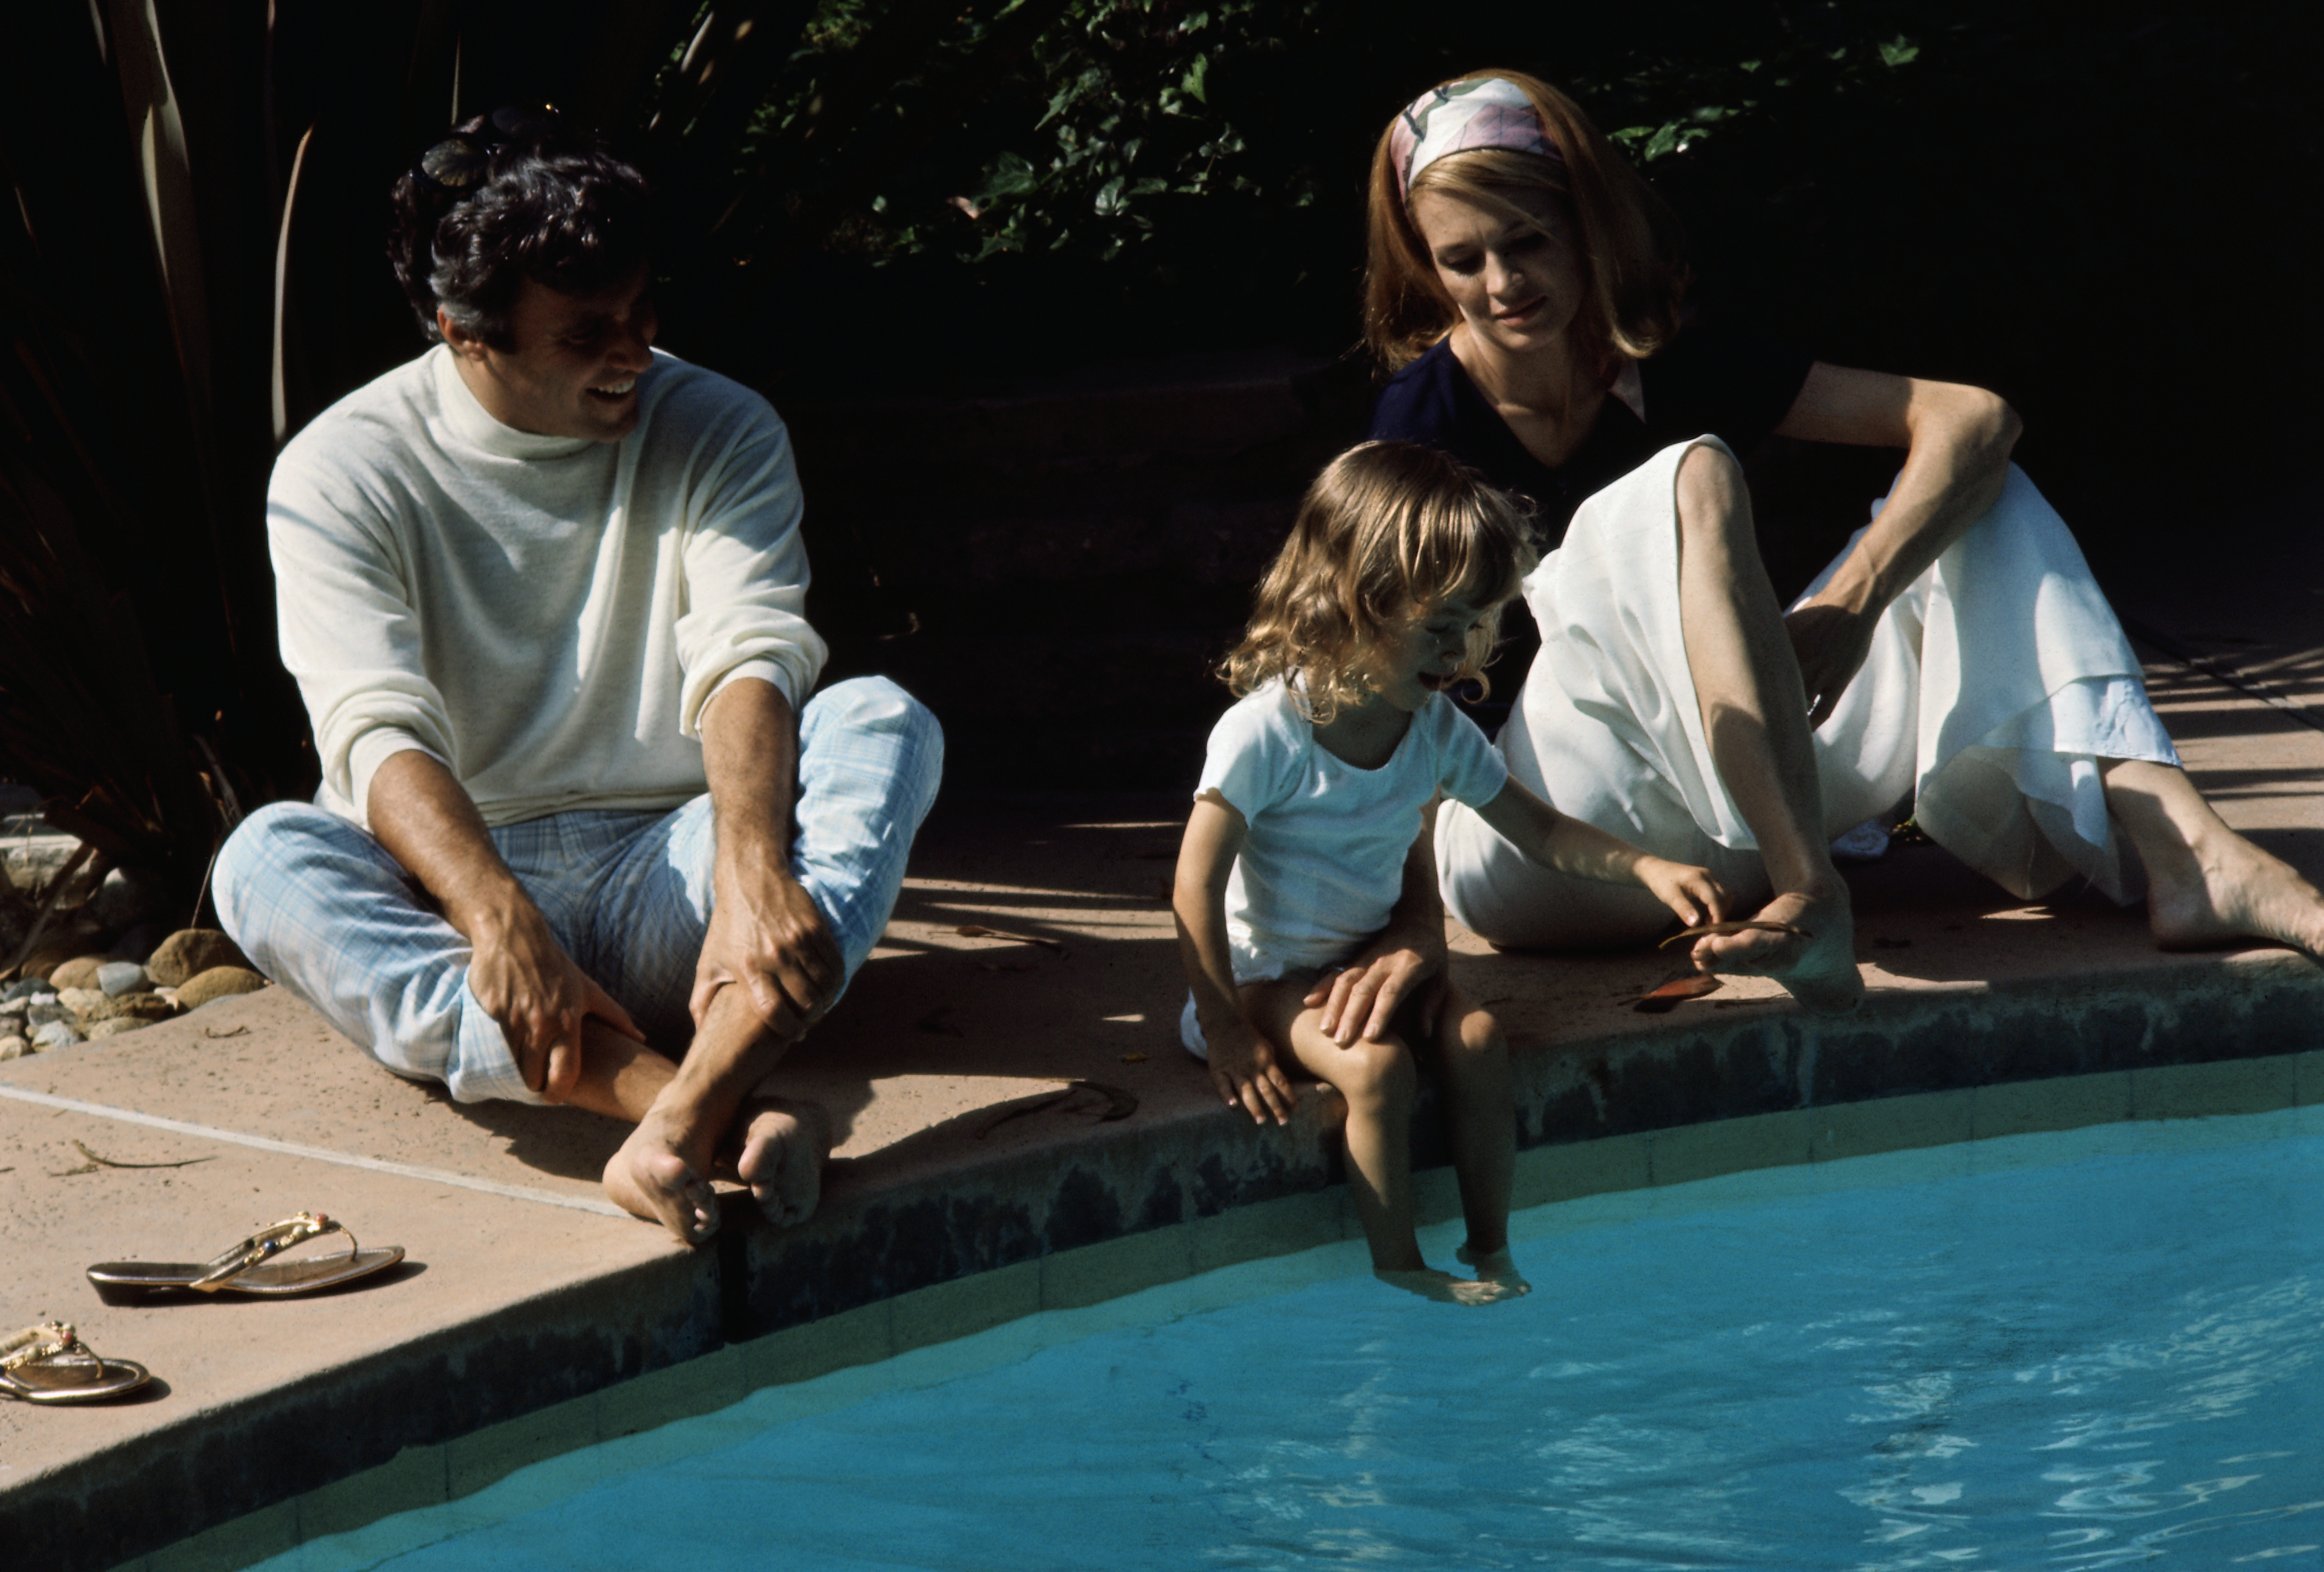 Burt Bacharach, Angie Dickinson, and their daughter Nikki Bacharach photographed by the swimming pool of their Hollywood home on June 3, 1969. | Source: Getty Images